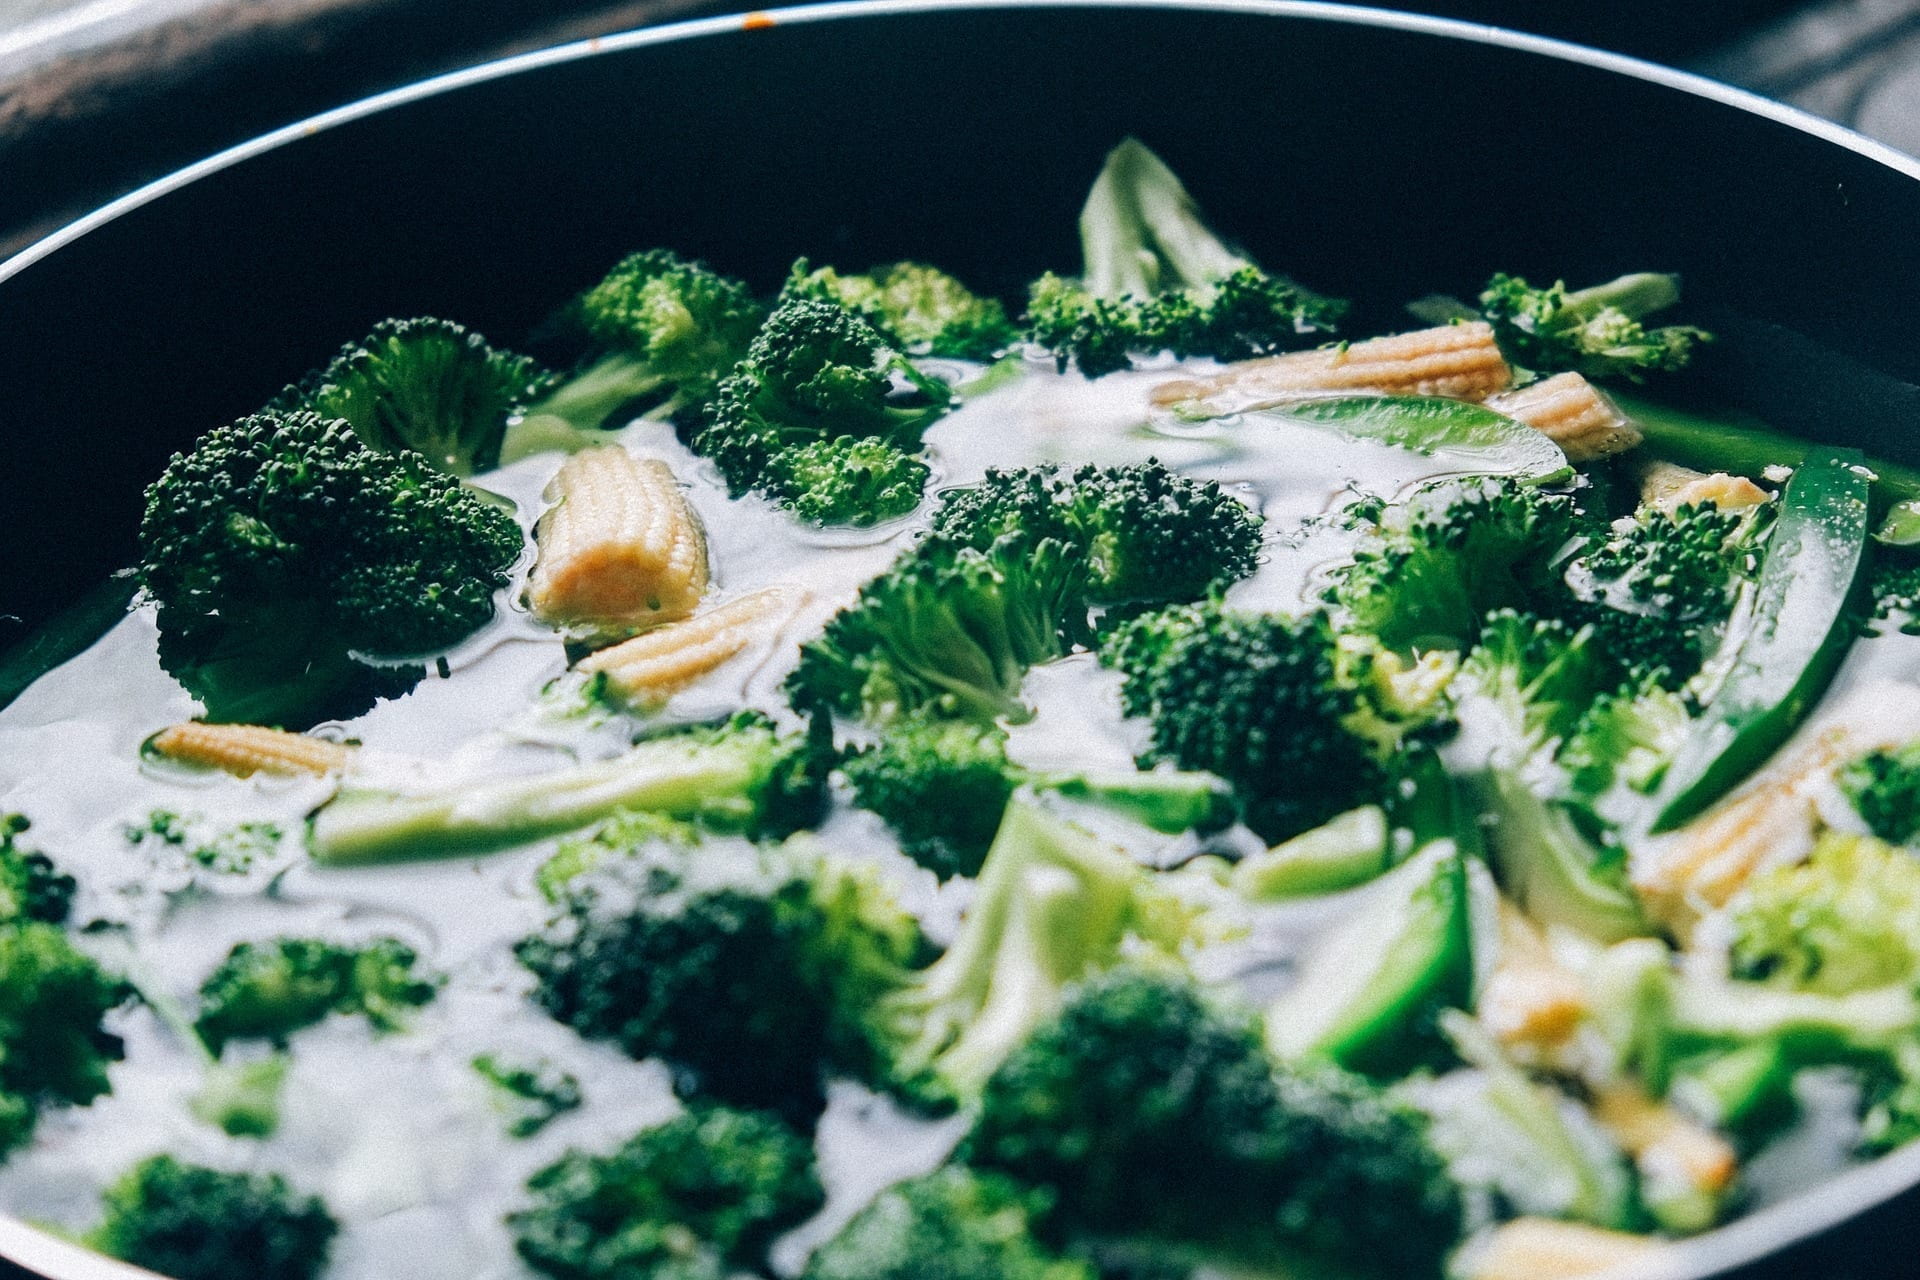 Broccoli, sweetcorn and snap peas, in a pan of water.